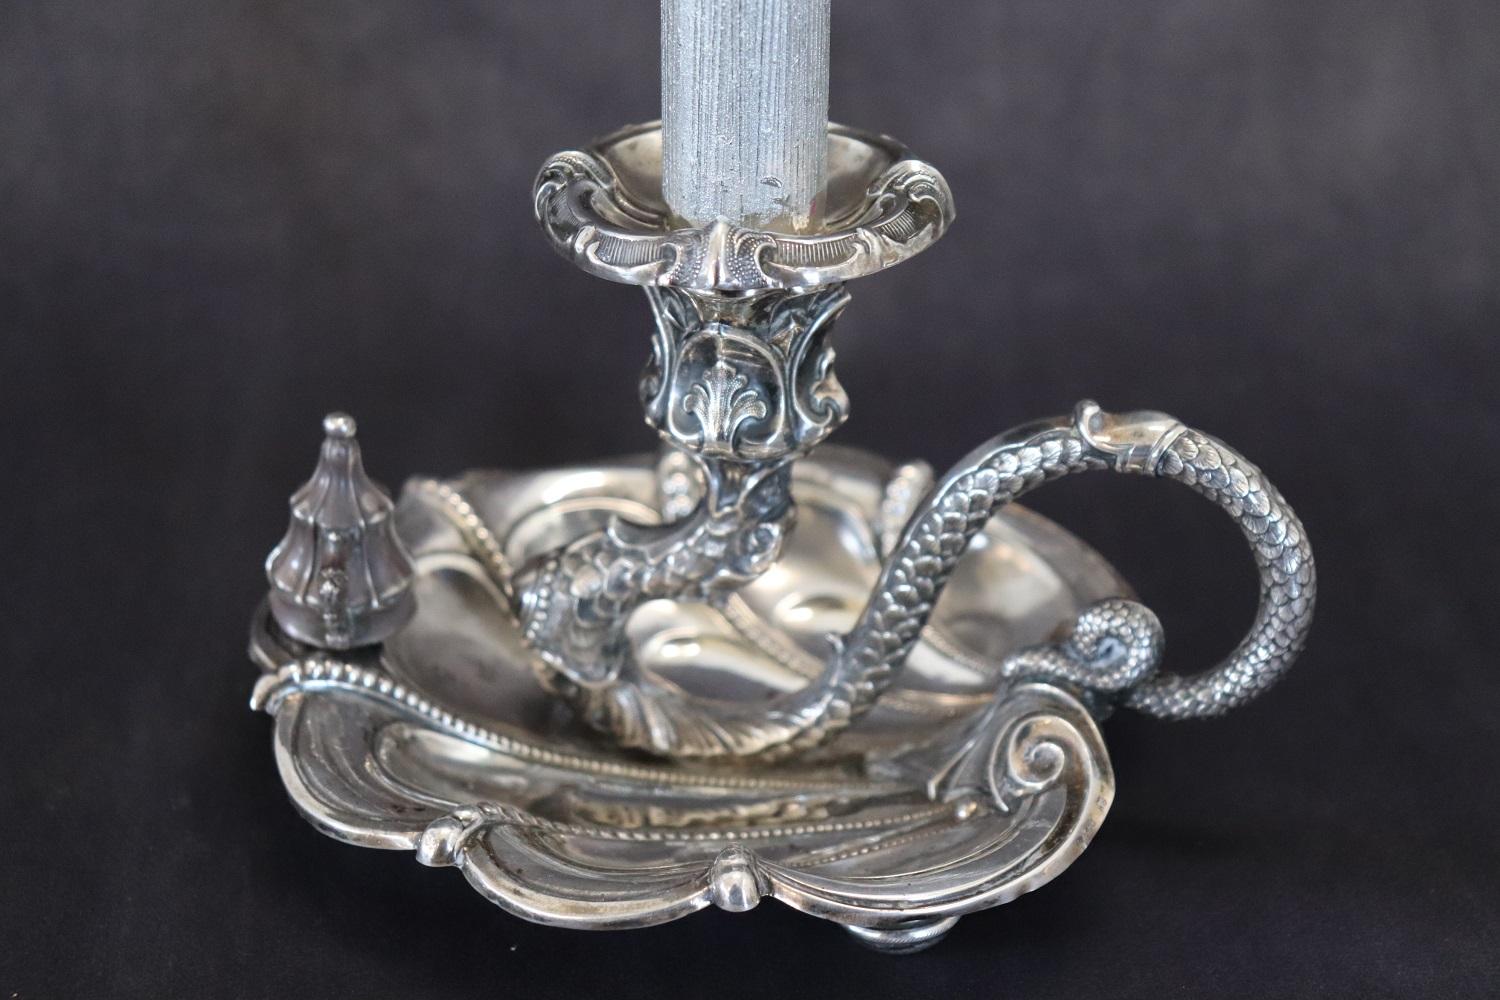 Beautiful late 19th century sterling silver candle holder. Refined finely chiseled decorations. Made by the famous German silversmith Wilhelm Binder engraved hallmark 800 WTB with crown and half moon. Weight Grams 136